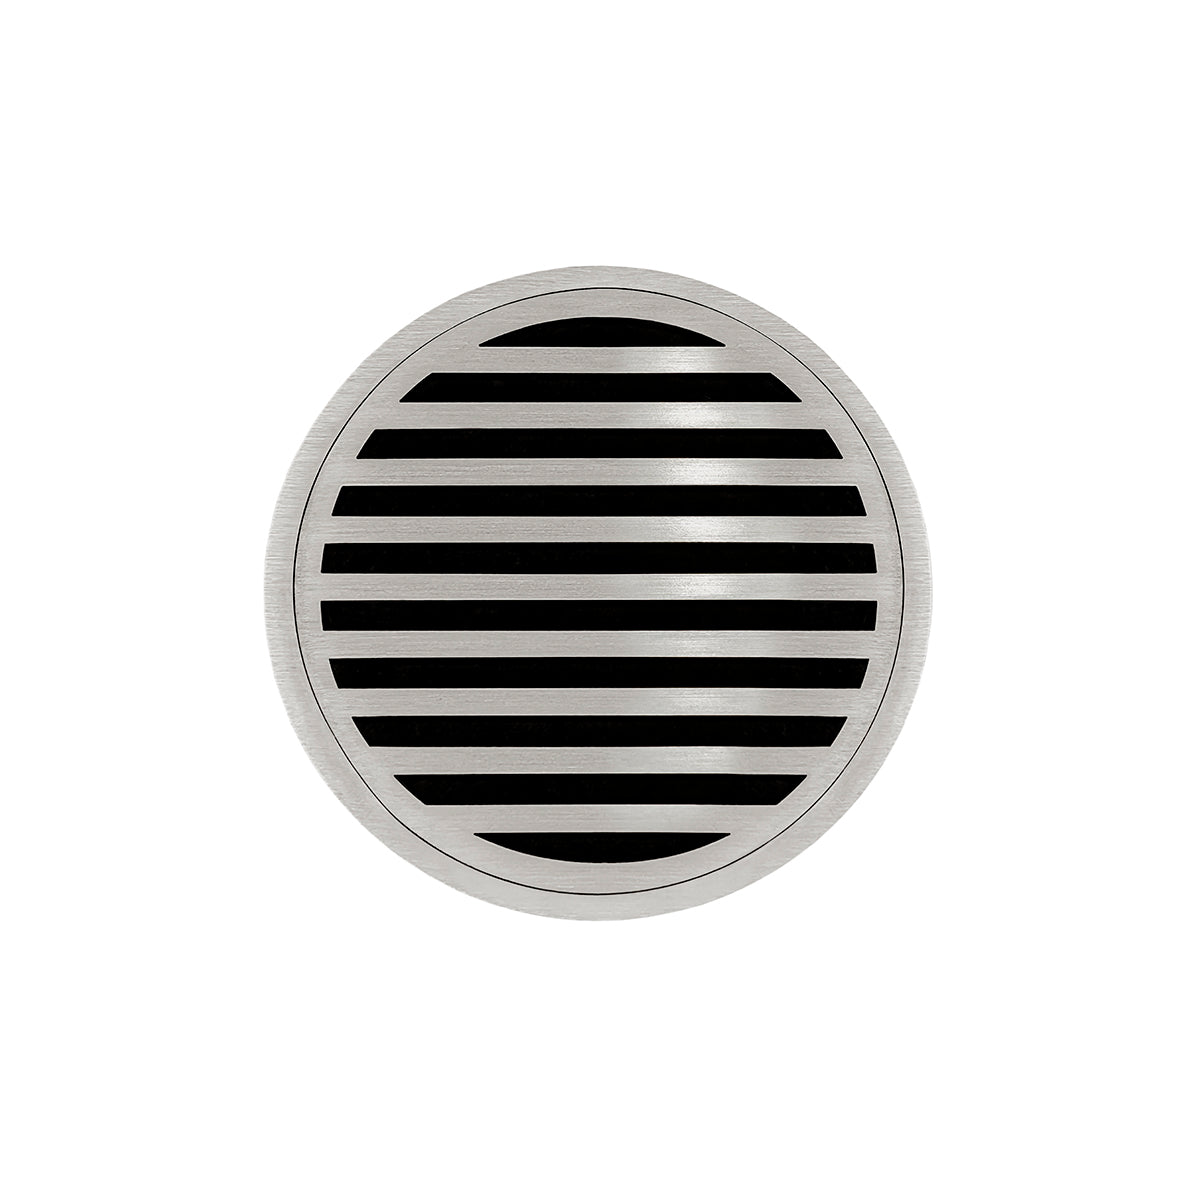 Infinity Drain 5" Round RND 5 High Flow Premium Center Drain Kit with Lines Pattern Decorative Plate with Cast Iron Drain Body, 3" No-Hub Outlet